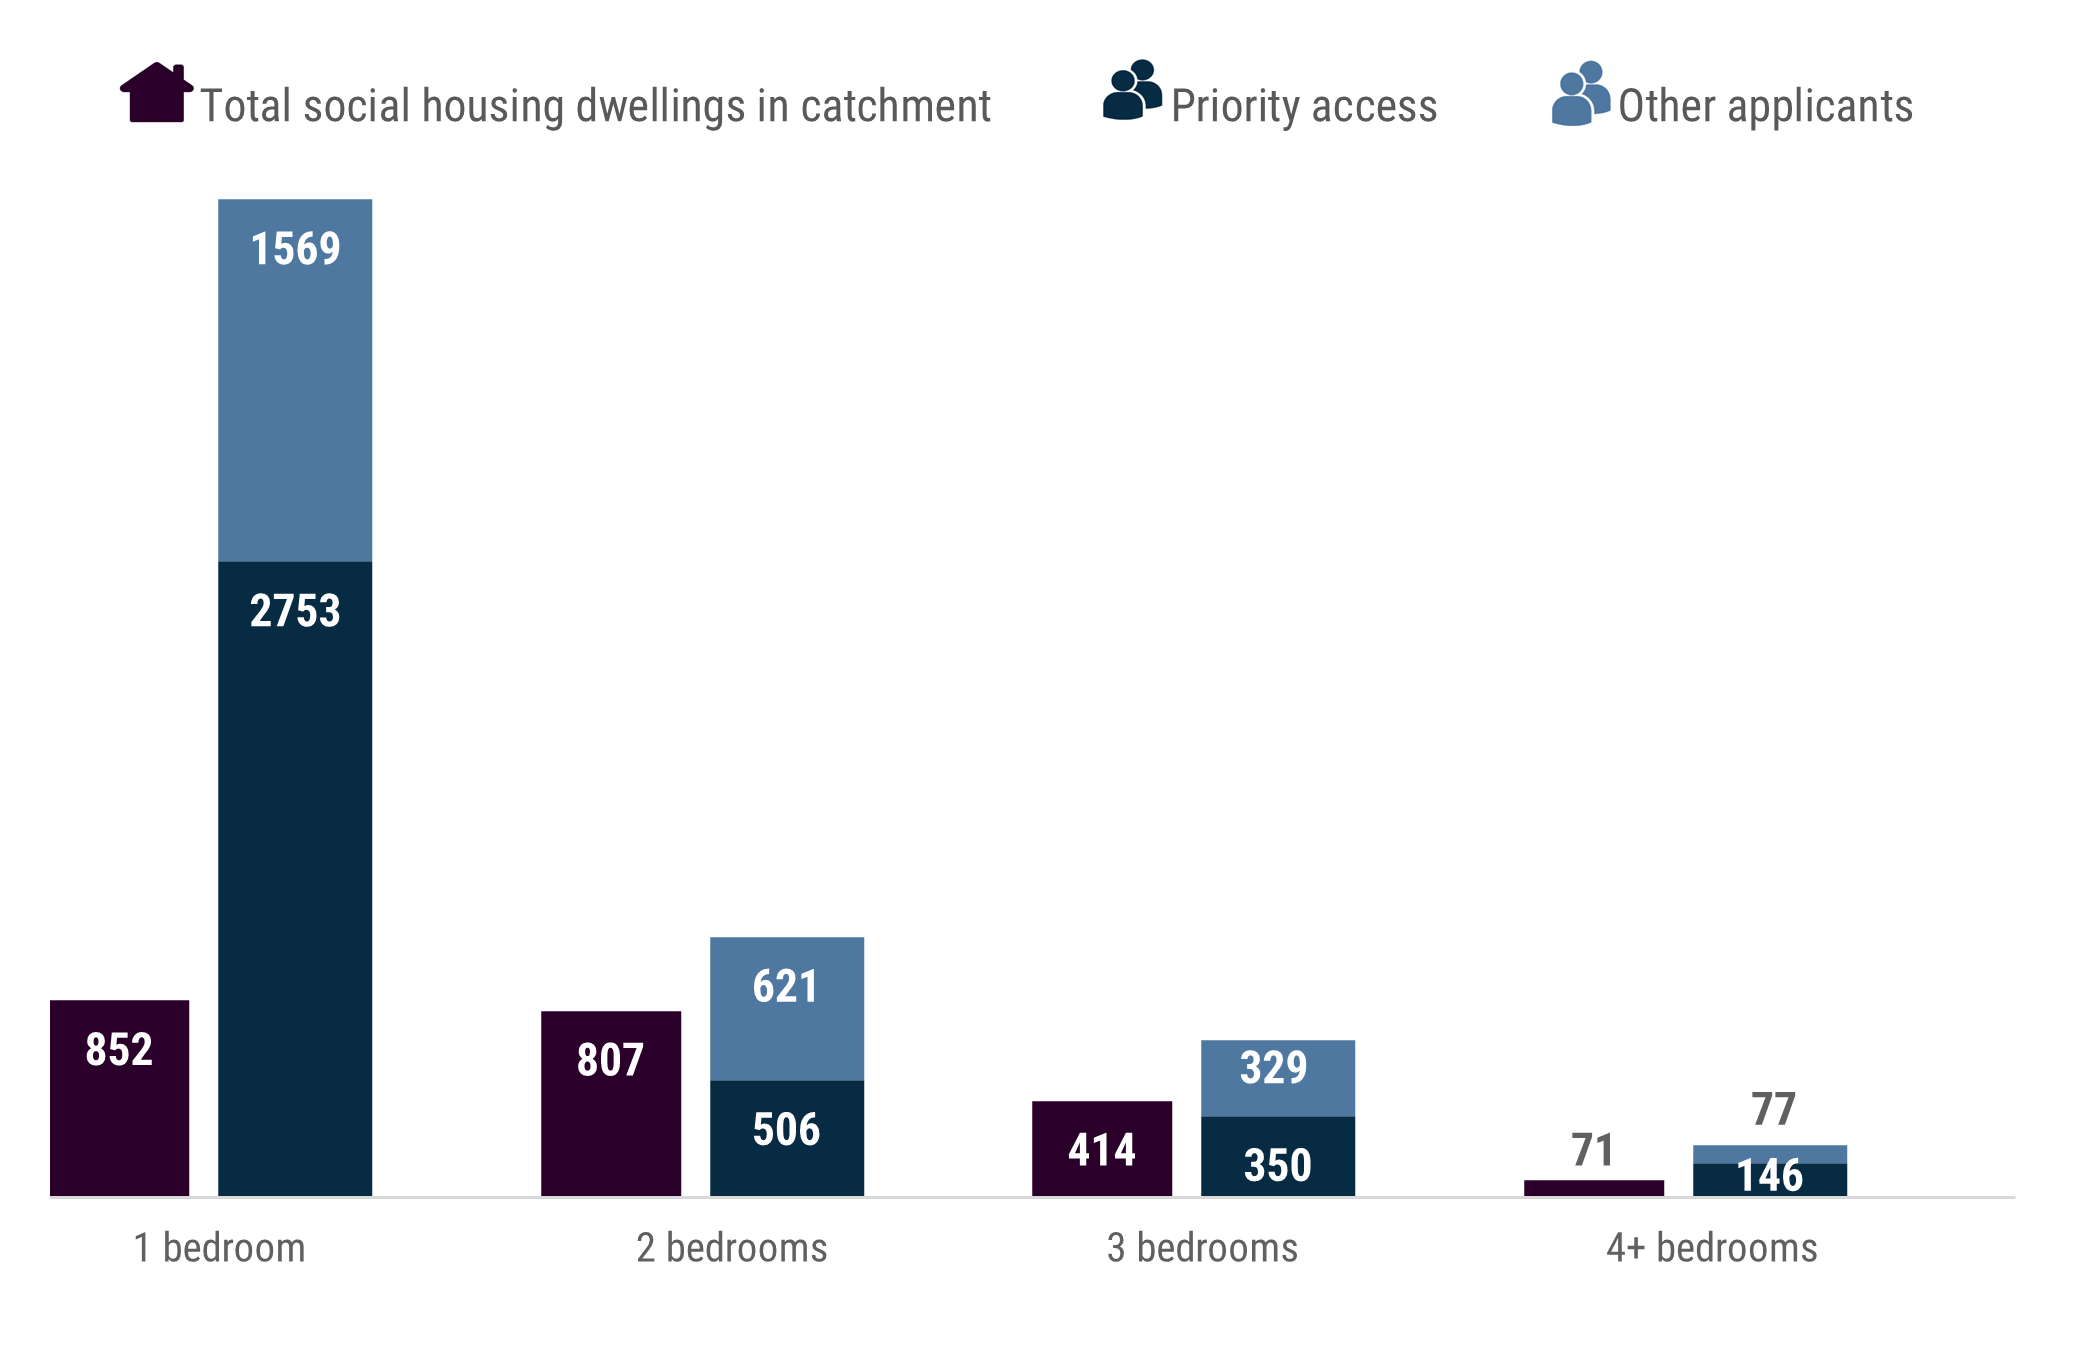 Column chart showing the number of priority access and other applicants combined is higher than the total number of dwellings that exist in the catchment for all bedroom categories in Box Hill. Demand outstrips supply by the greatest margin for 1-bedroom properties, for which there were 852 properties and 2753 priority applicants plus 1569 other applicants. 